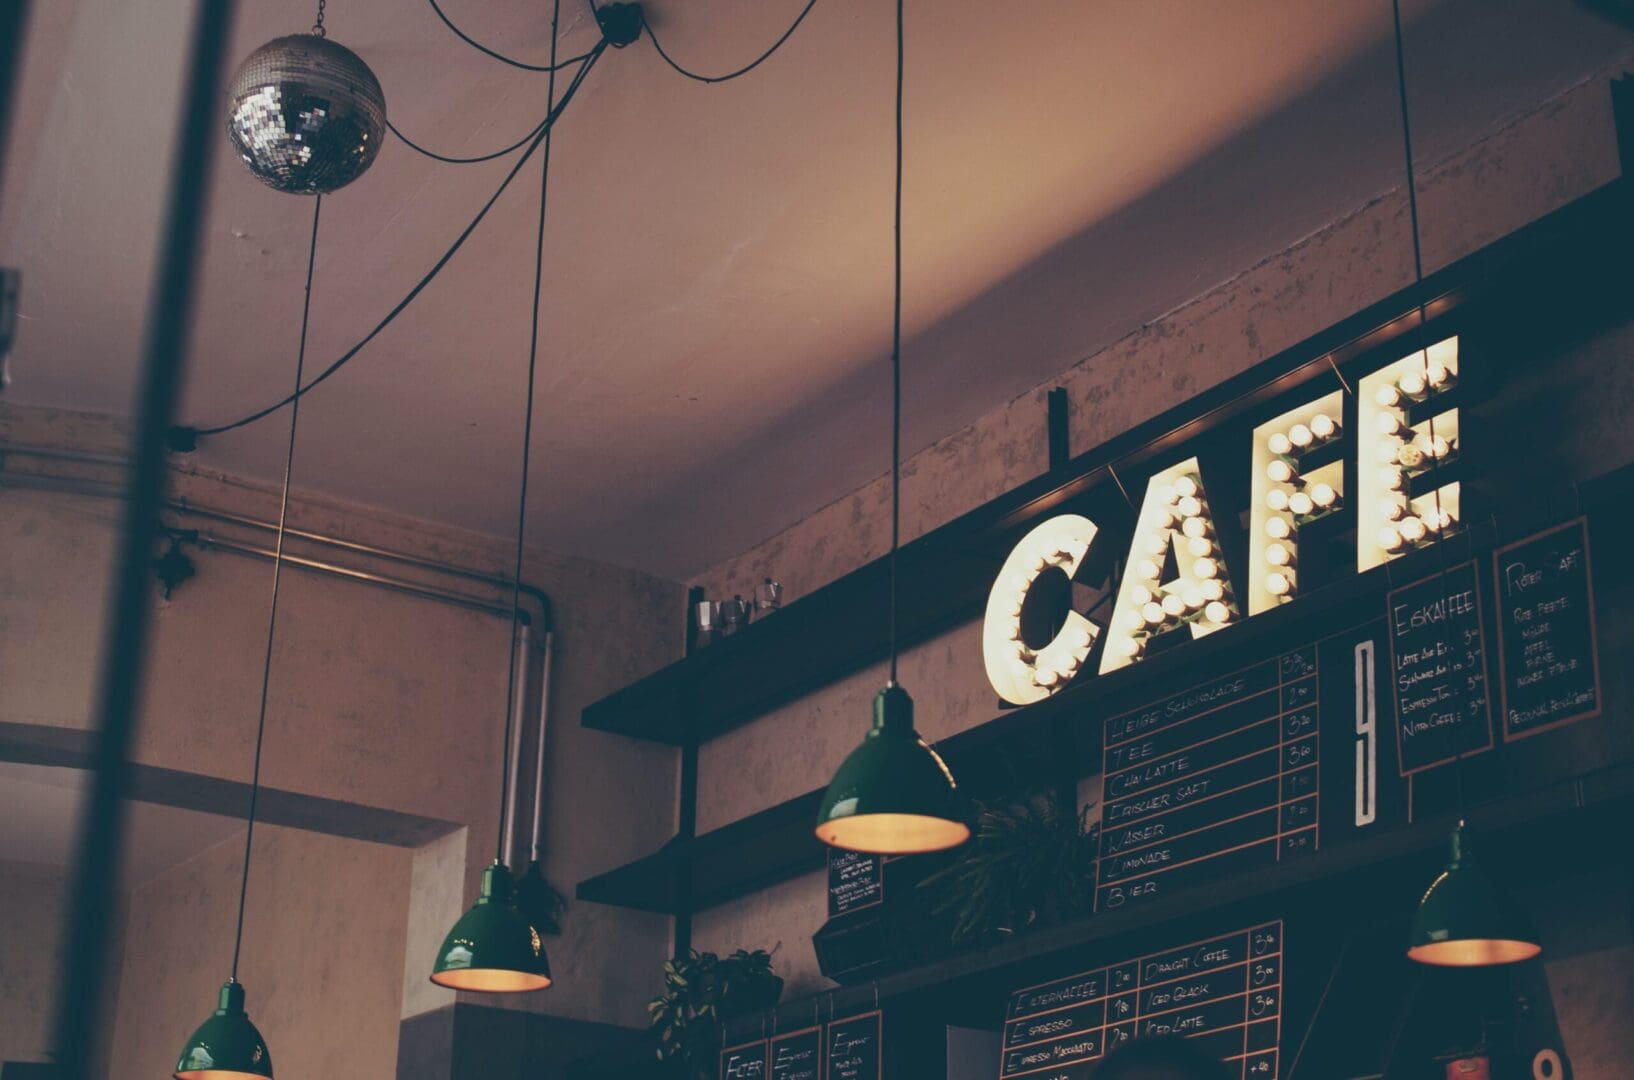 Best coffee shops in Vancouver